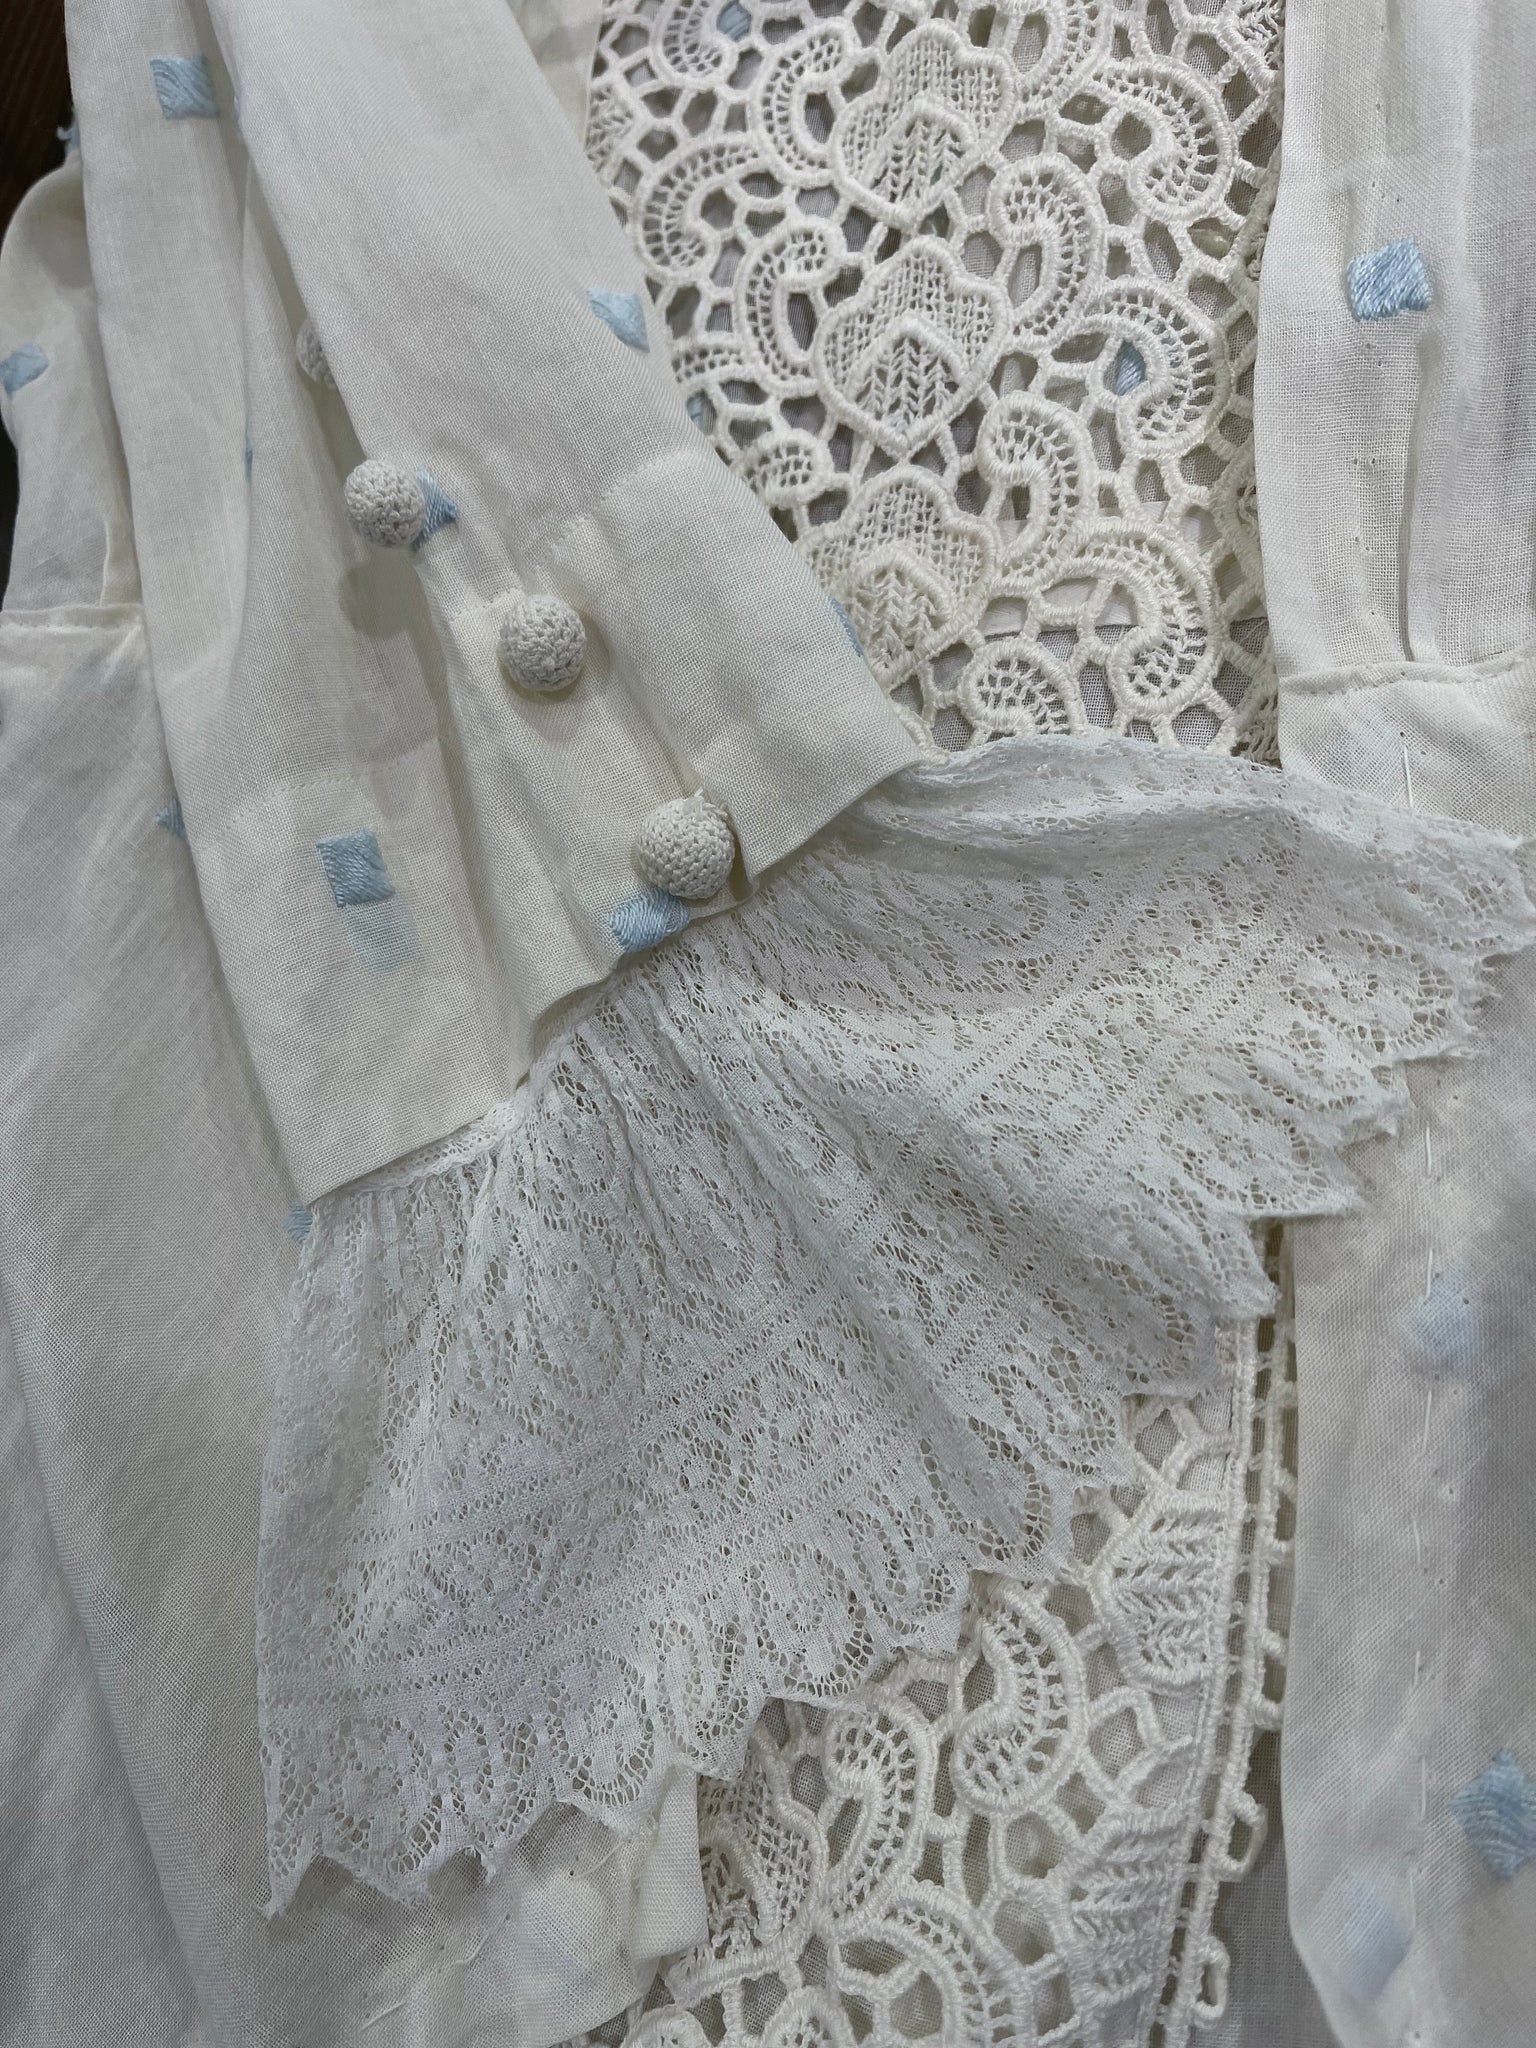 Edwardian White with Hand Embroidered Blue Polka Dot Lawn Dress, sleeve  lace detail